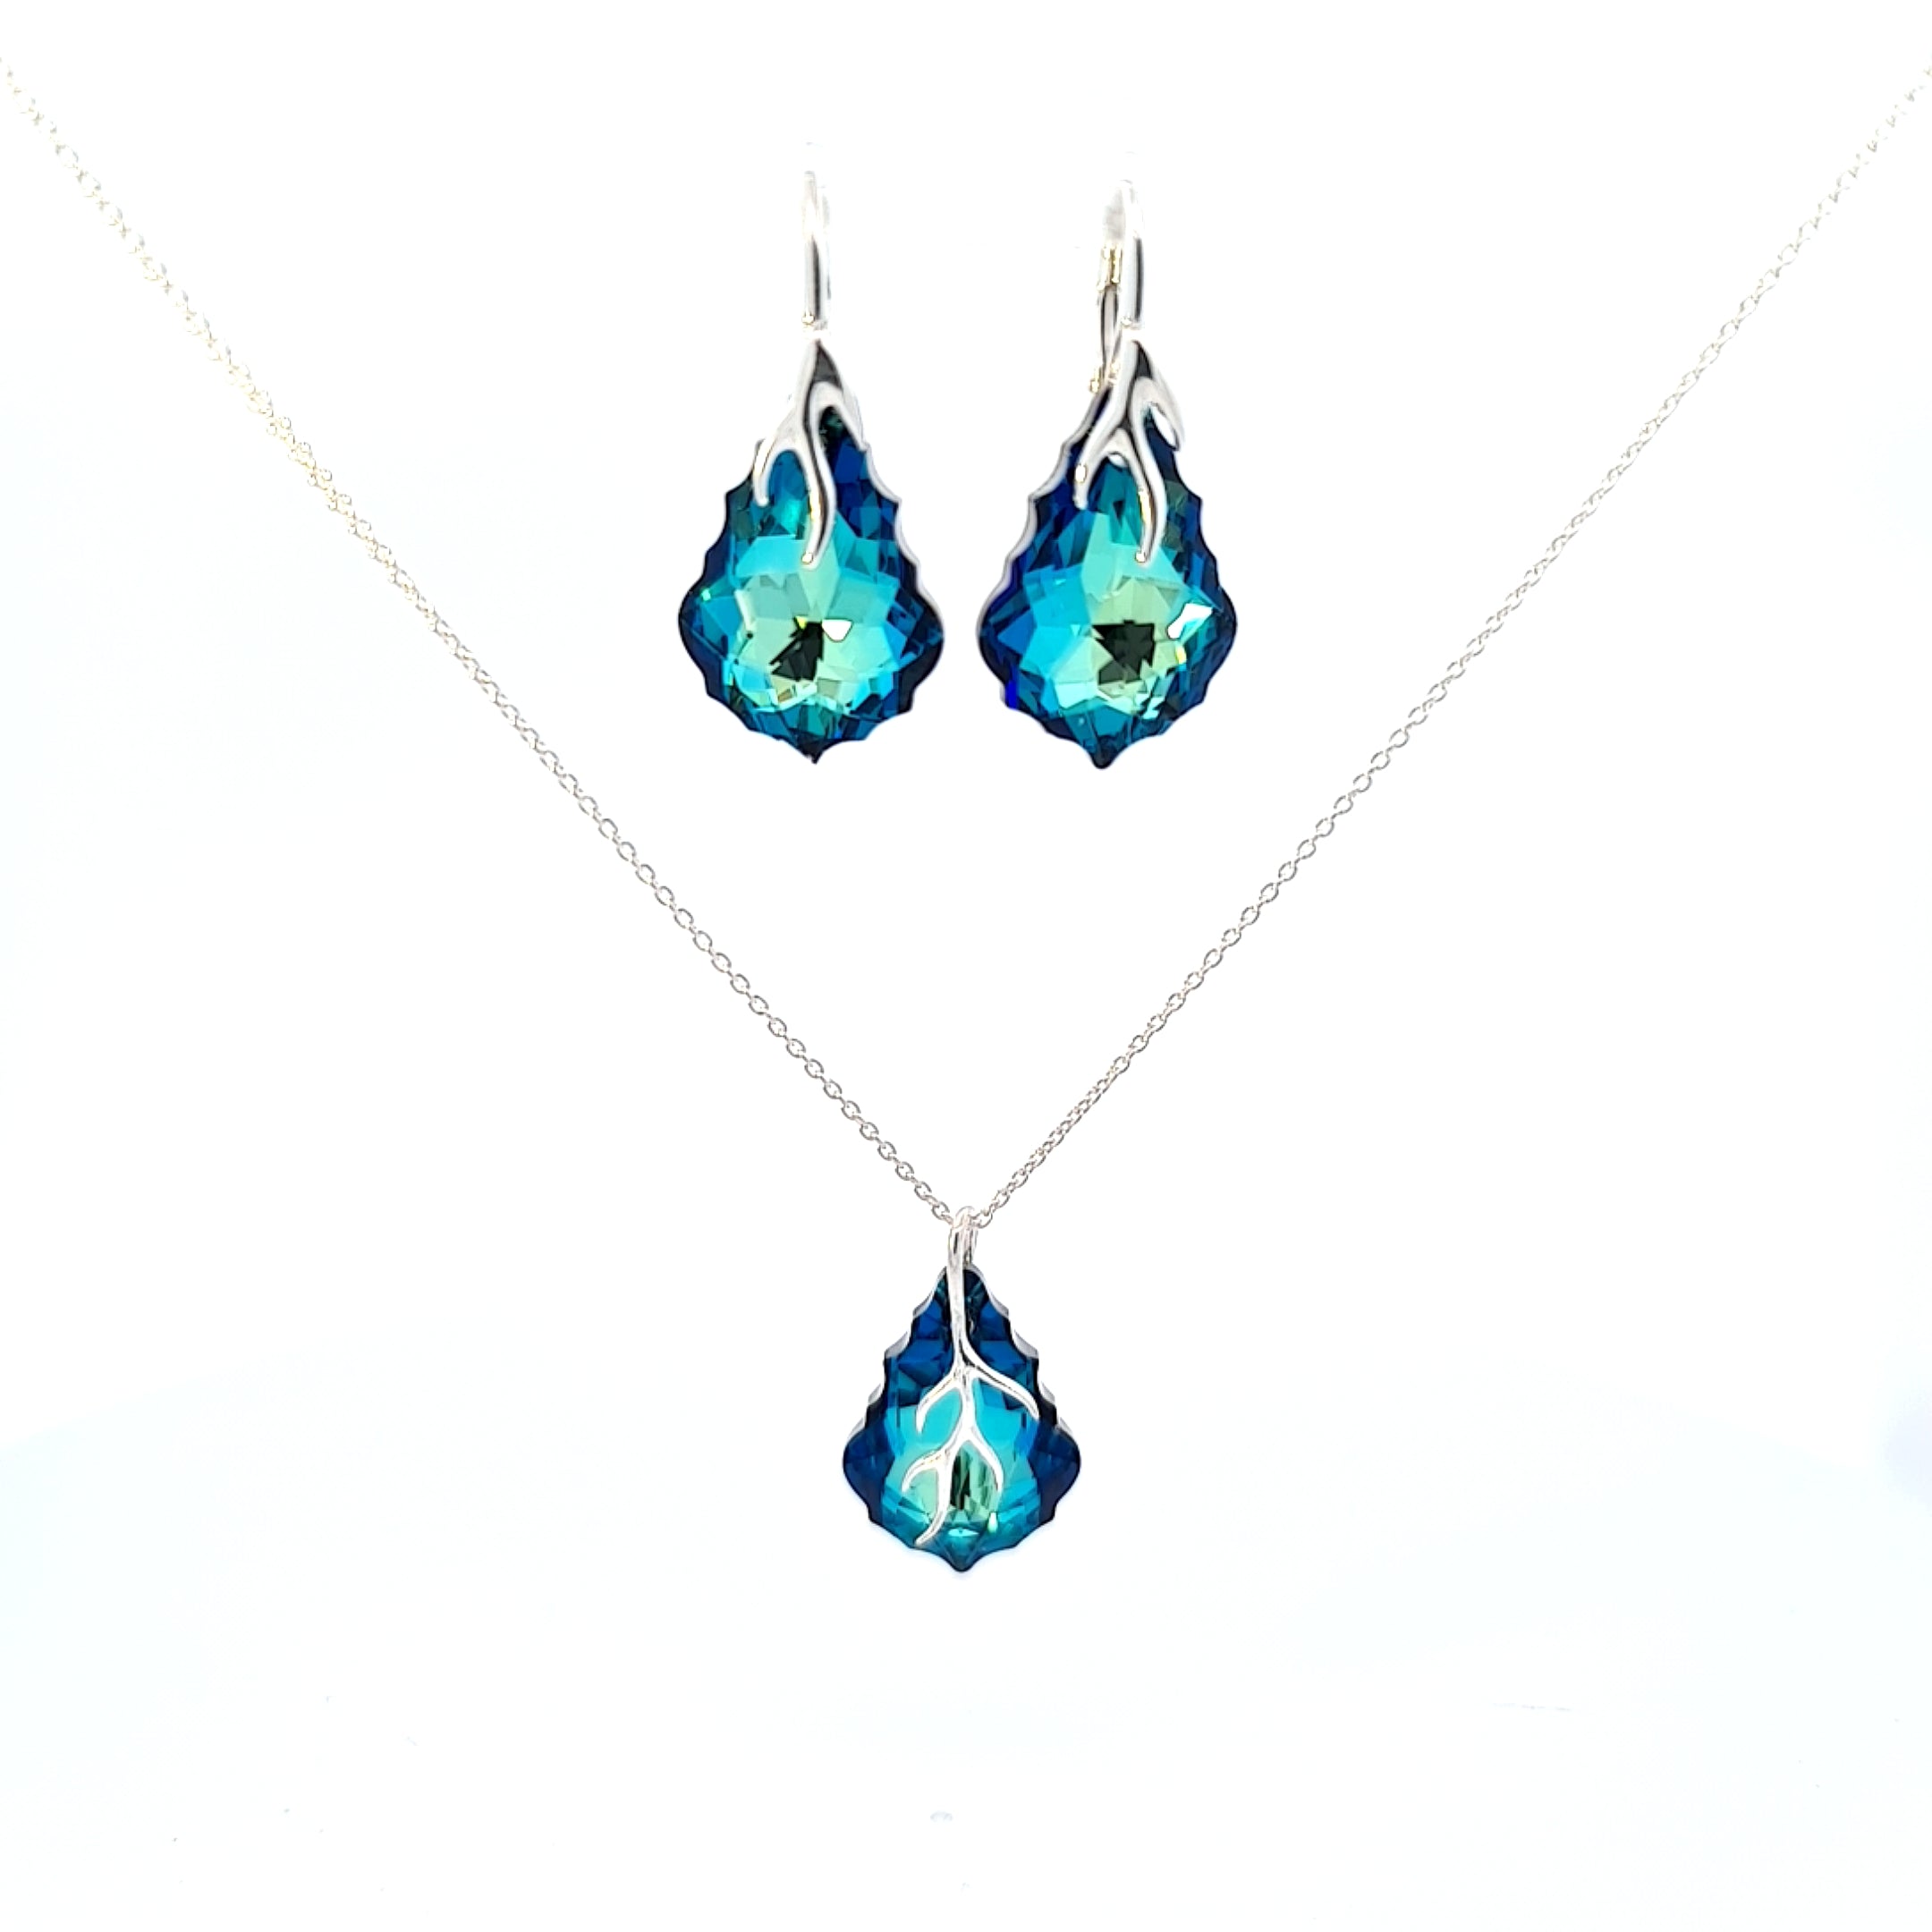 Baroque Crystal Earrings and Pendant Necklace Jewellery Set